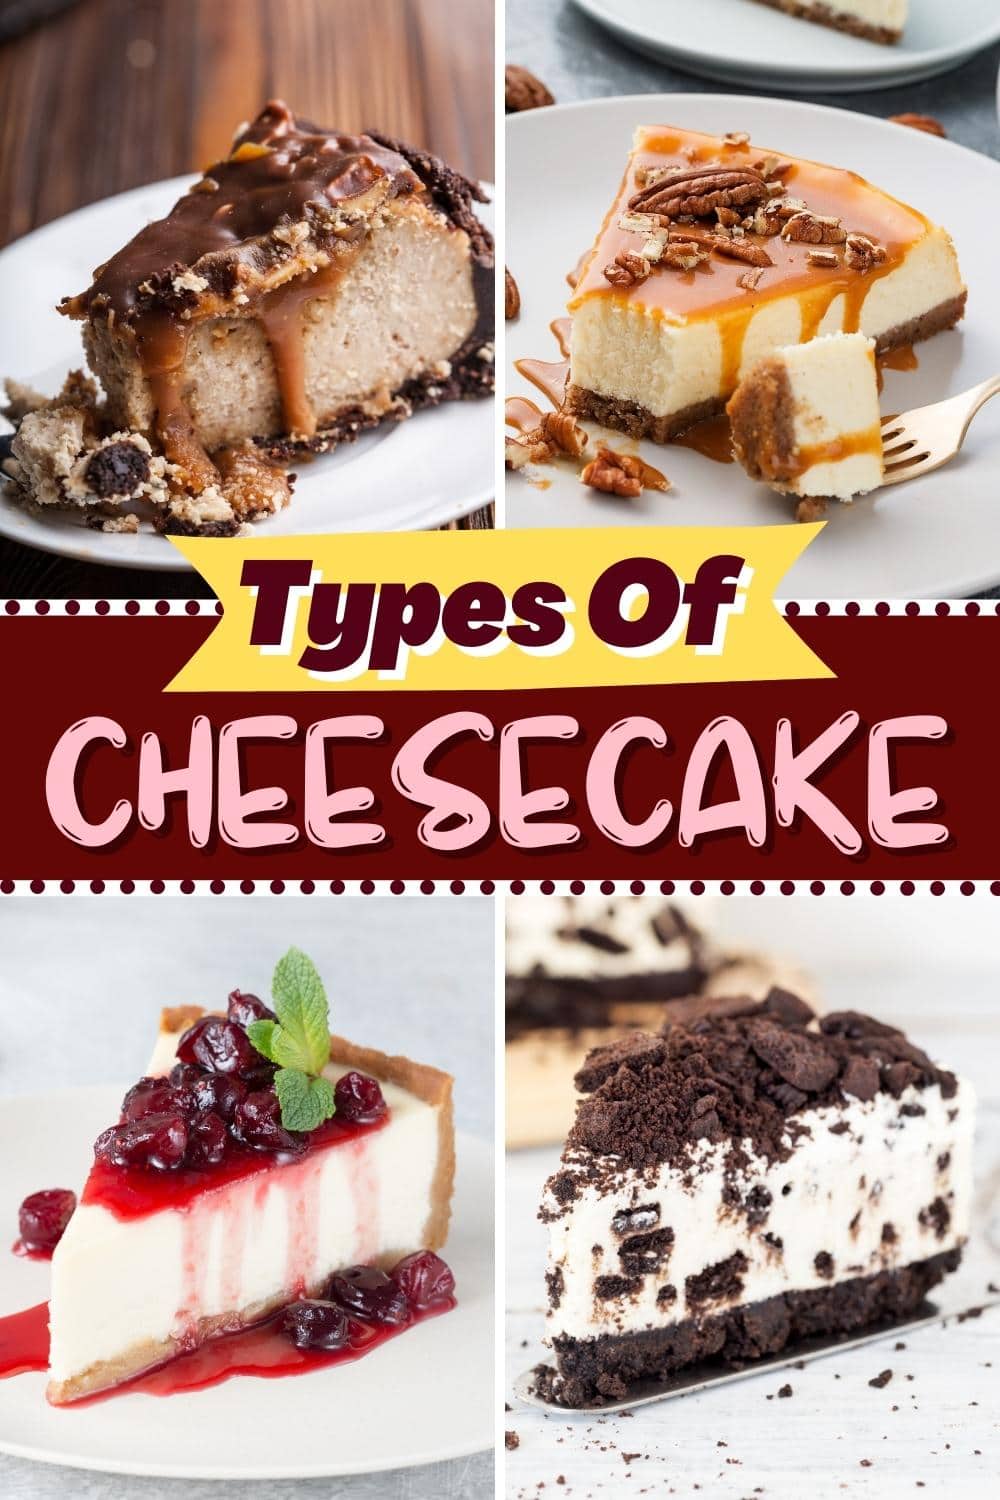 Types Of Cheesecake 1 